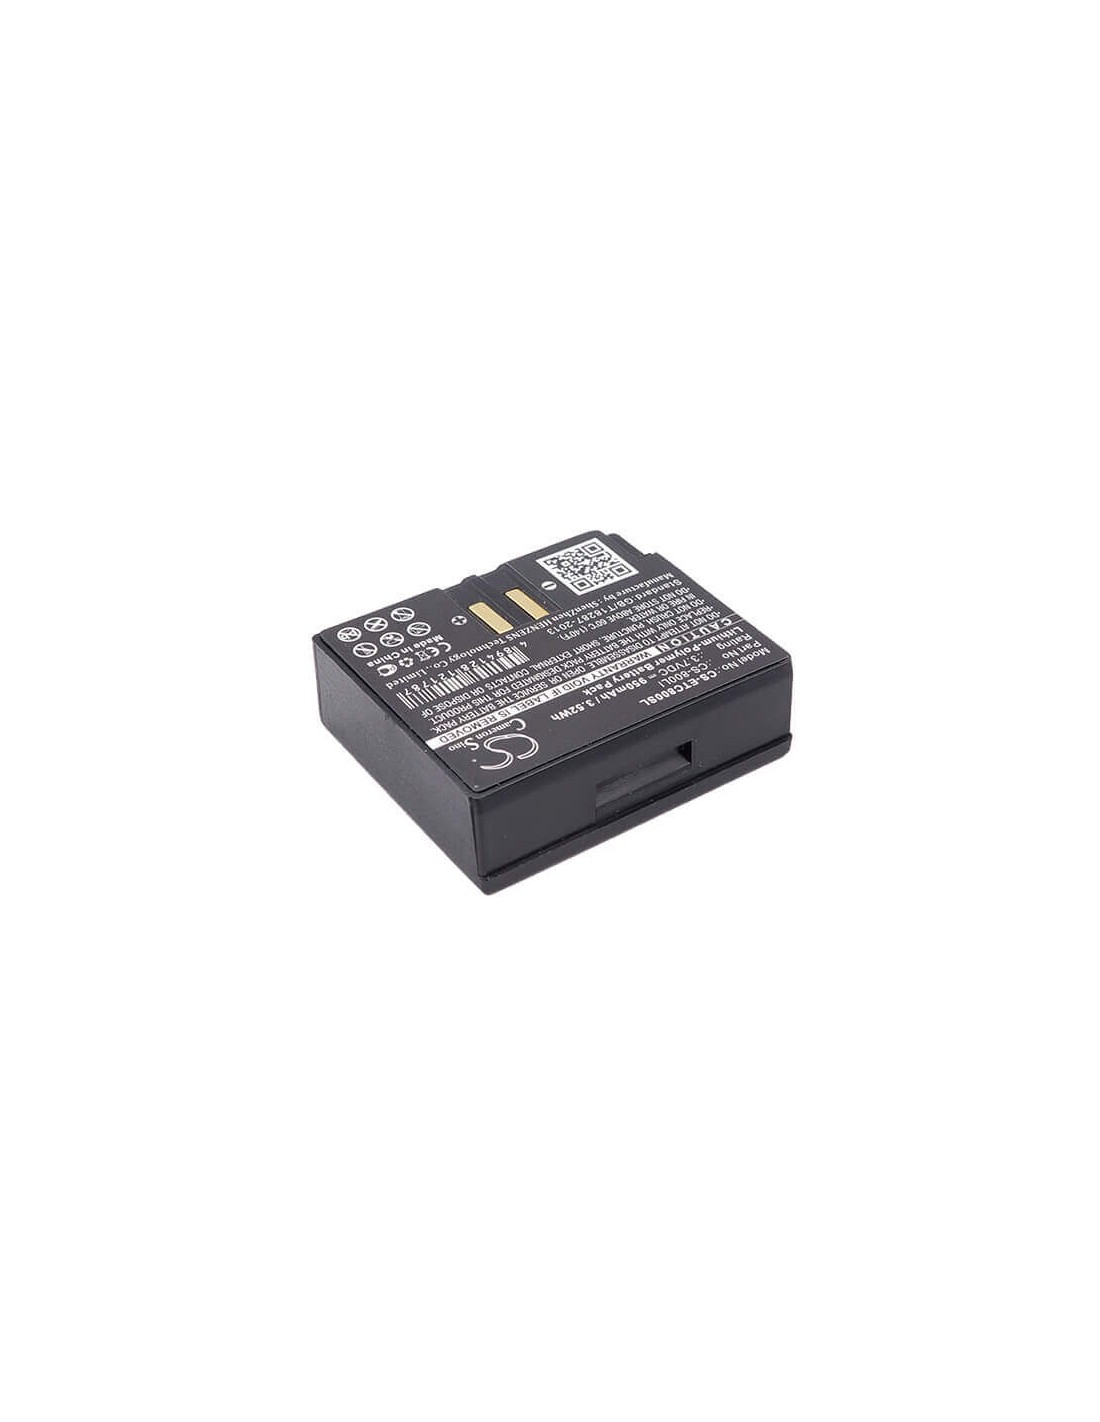 Battery for Eartec Comstar Wireless Headsets 3.7V, 950mAh - 3.52Wh